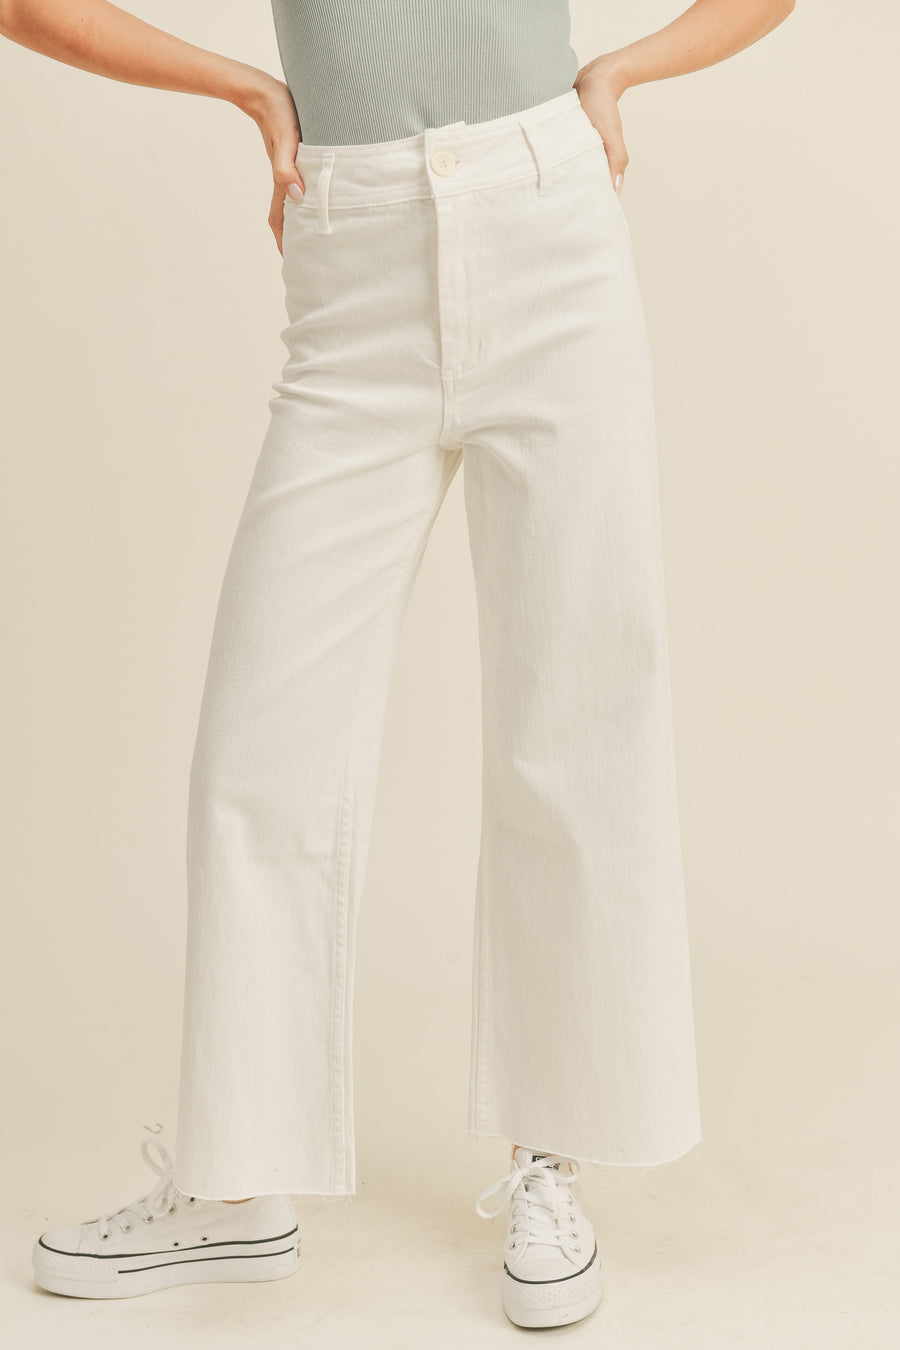 Denim wide leg jeans with an ankle cut in the color white.